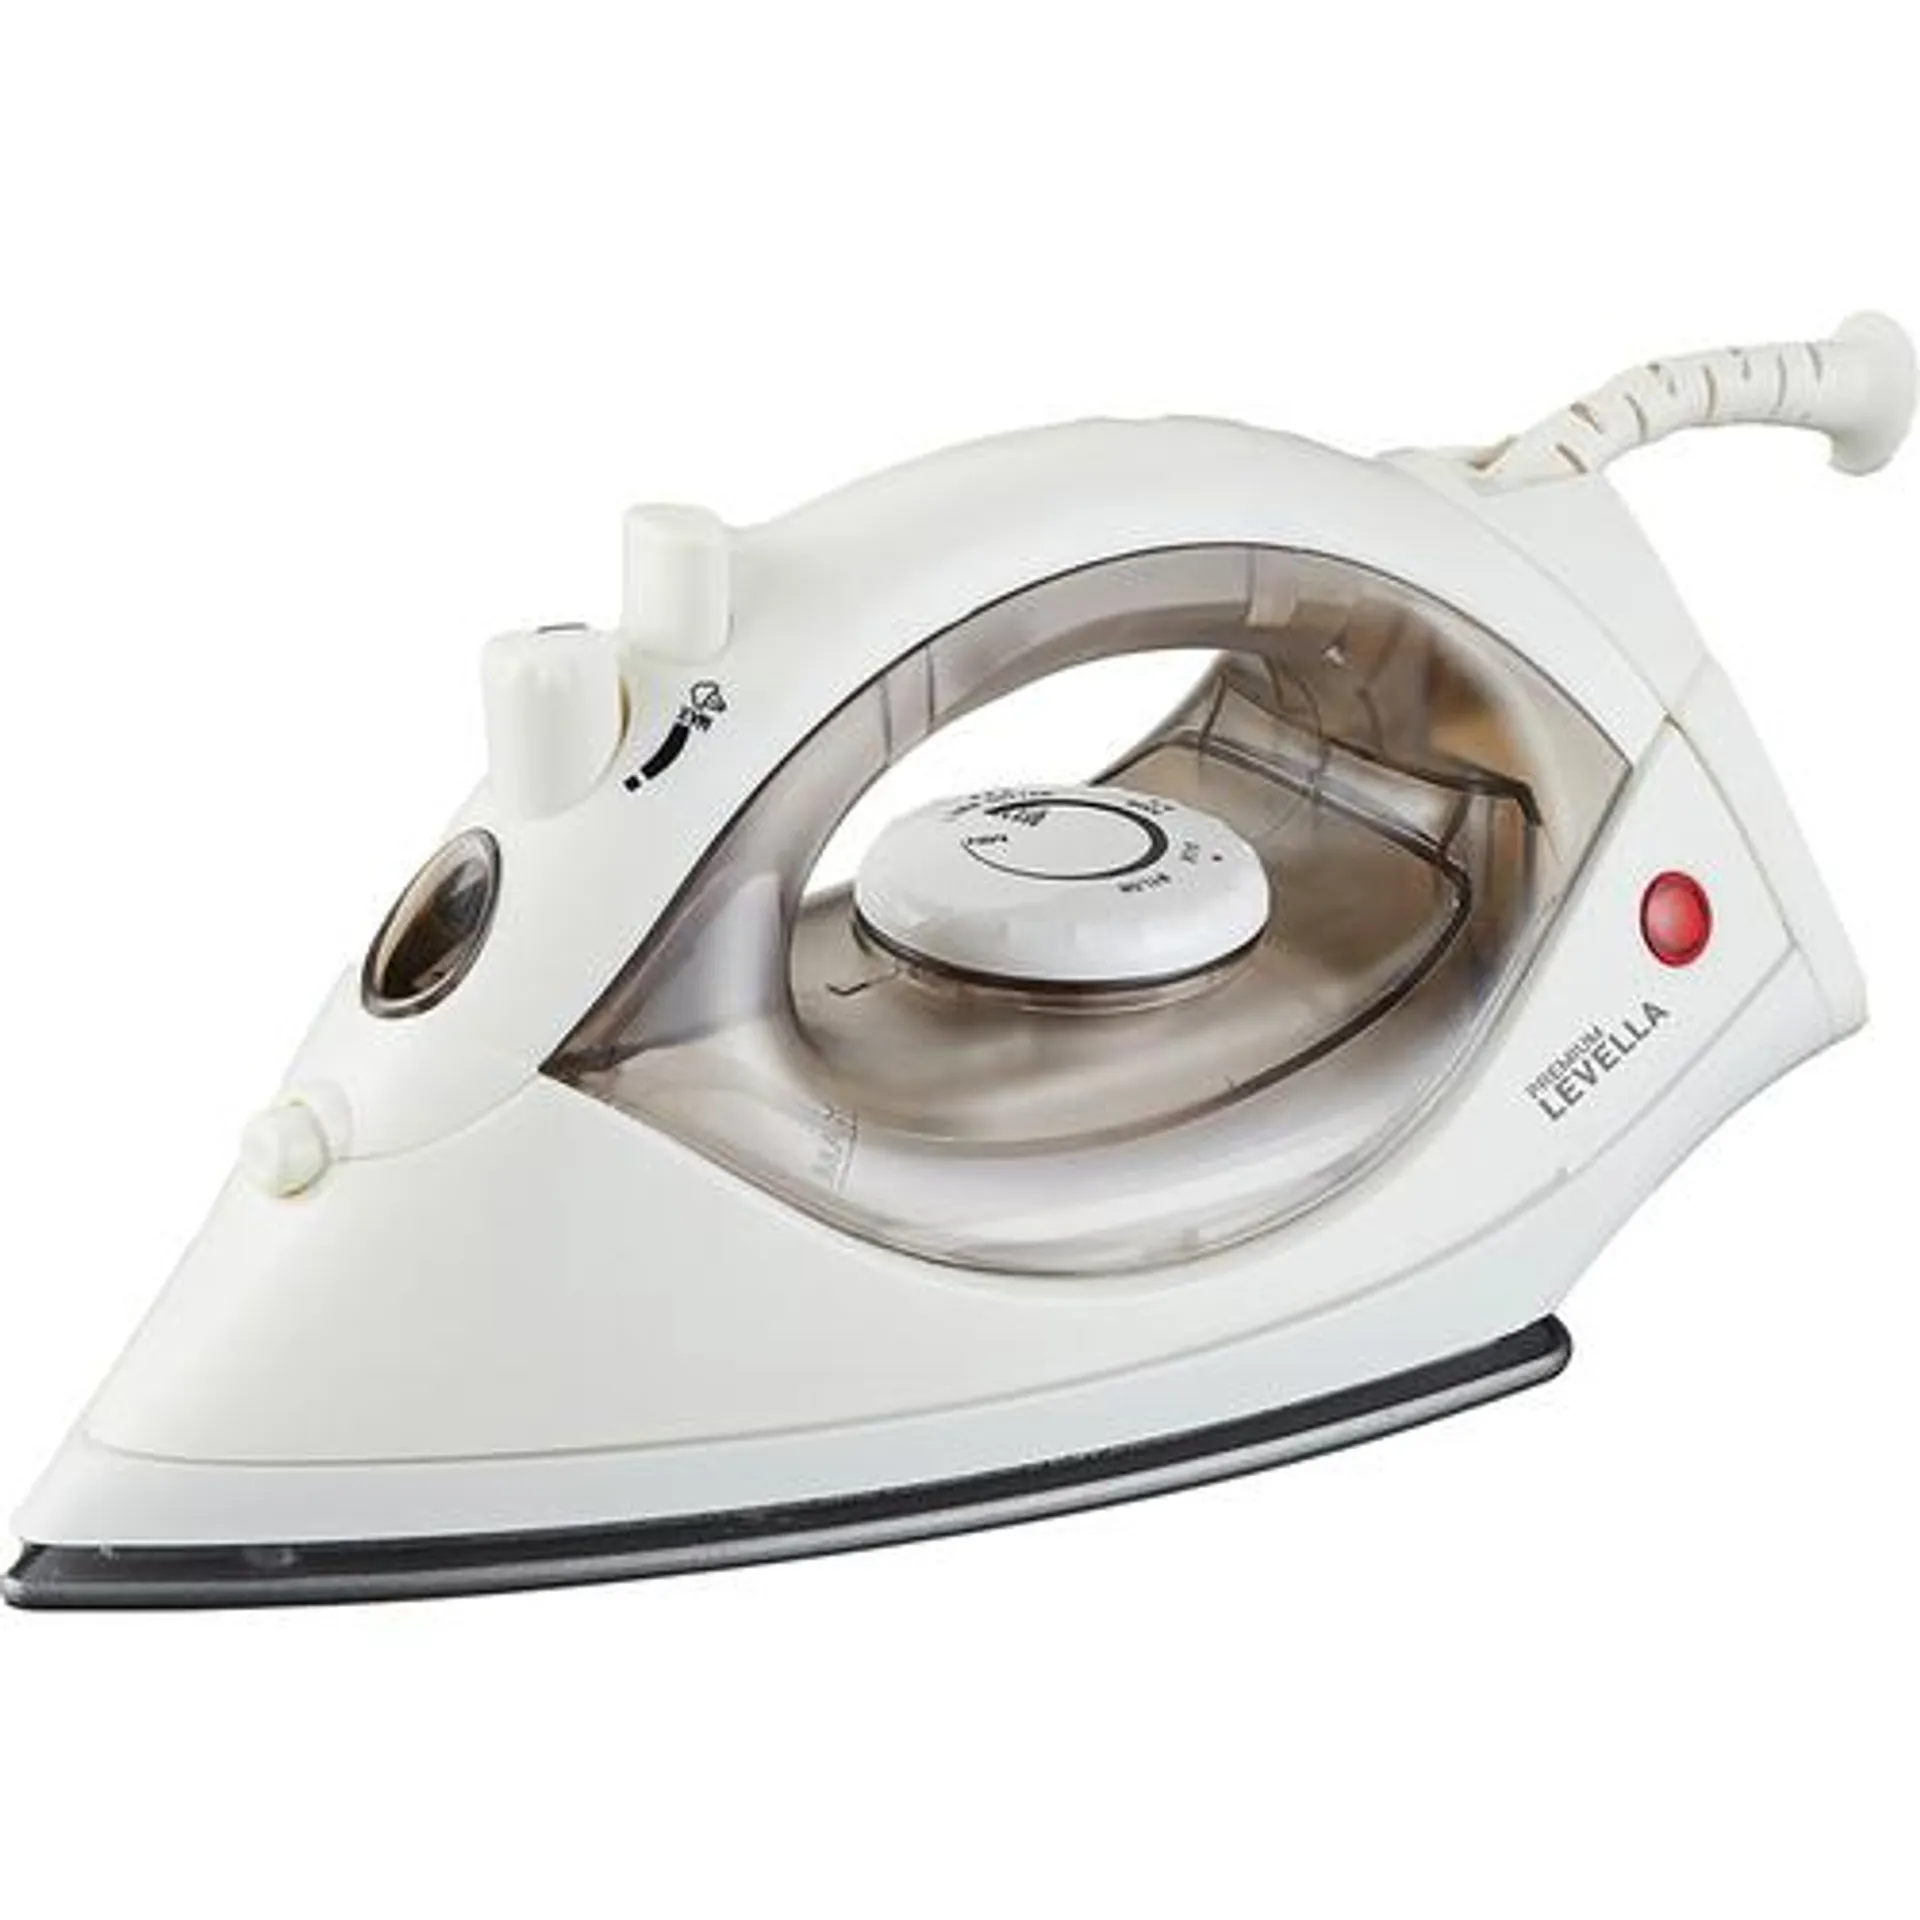 Steam and Dry Iron in White with Non-Stick Sole Plate and Steam Control